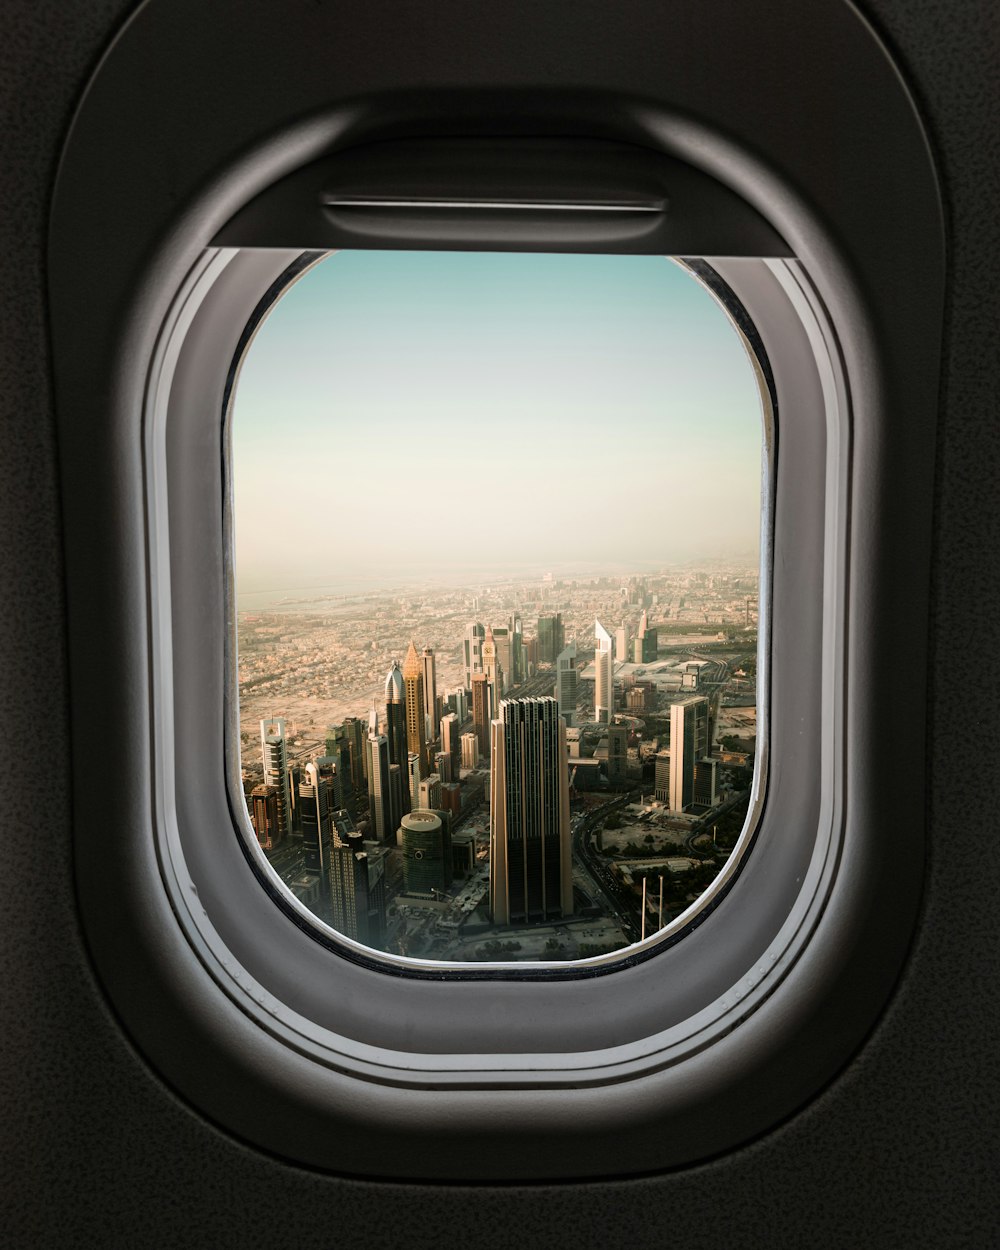 27+ Airplane Window Pictures | Download Free Images on Unsplash